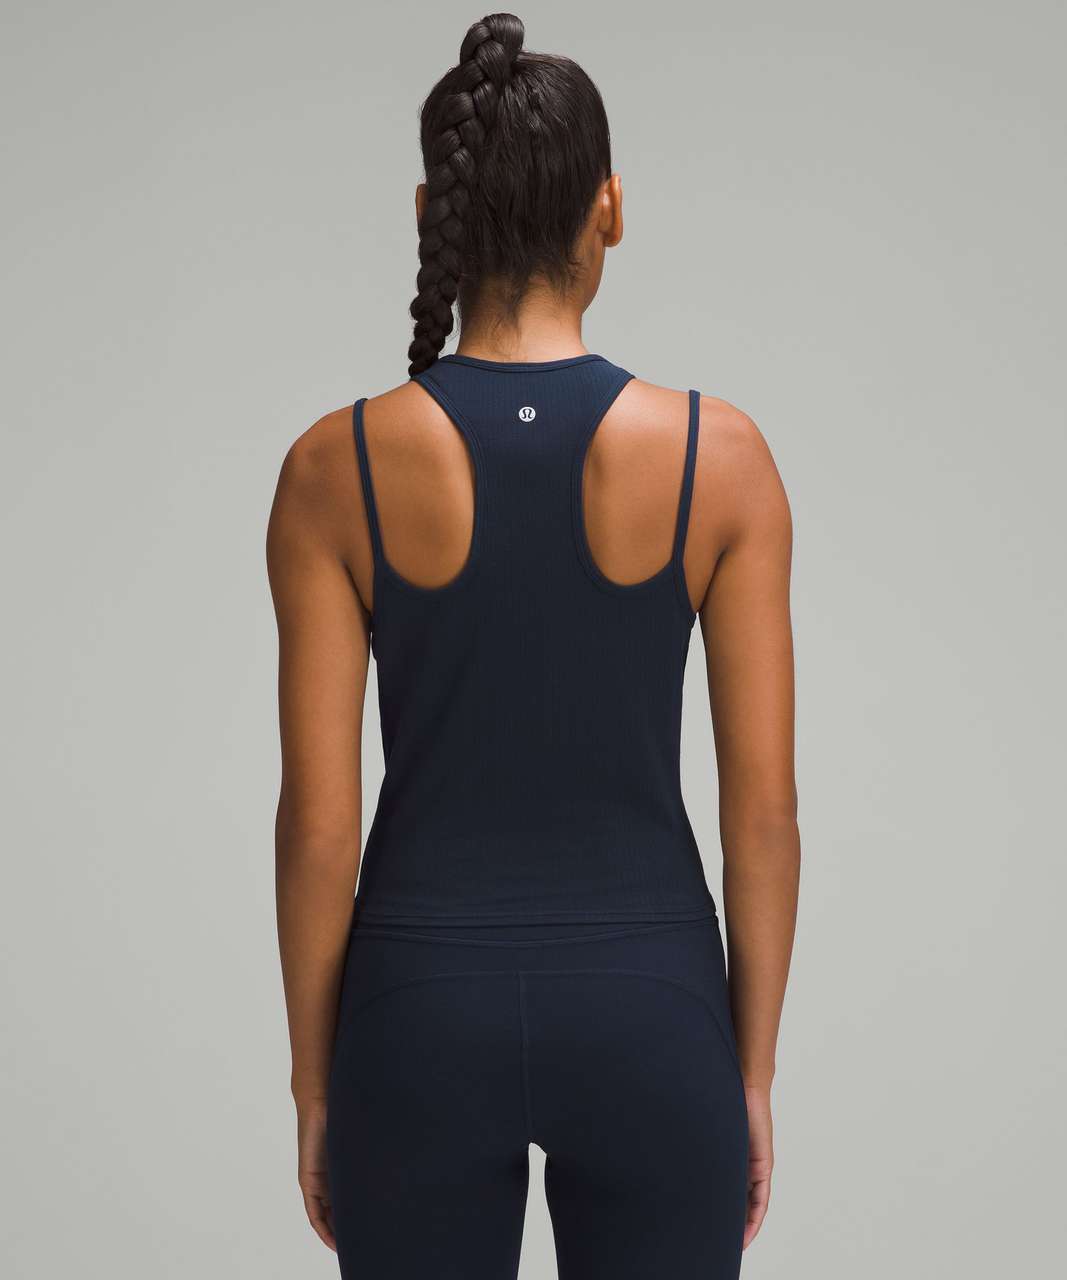 Everyday Yoga Serenity Thin Strap Support Tank at